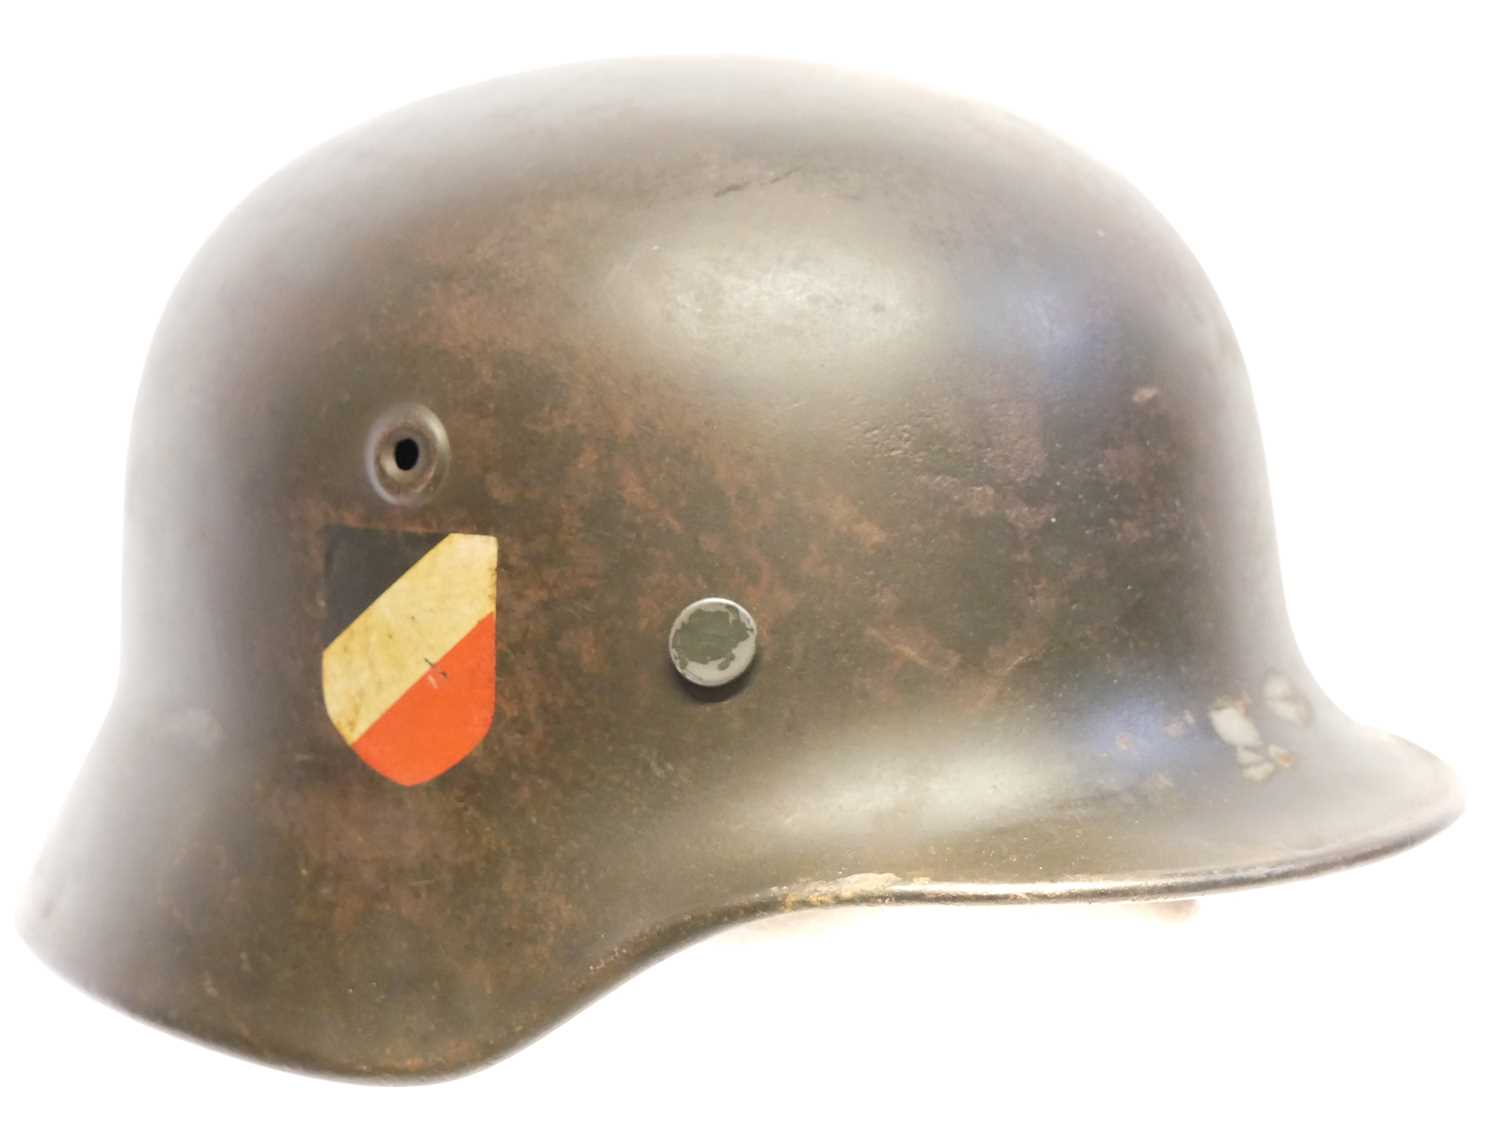 German WWII M40 helmet, stamped Q64 DN44, the originality of the decals is not known, the helmet